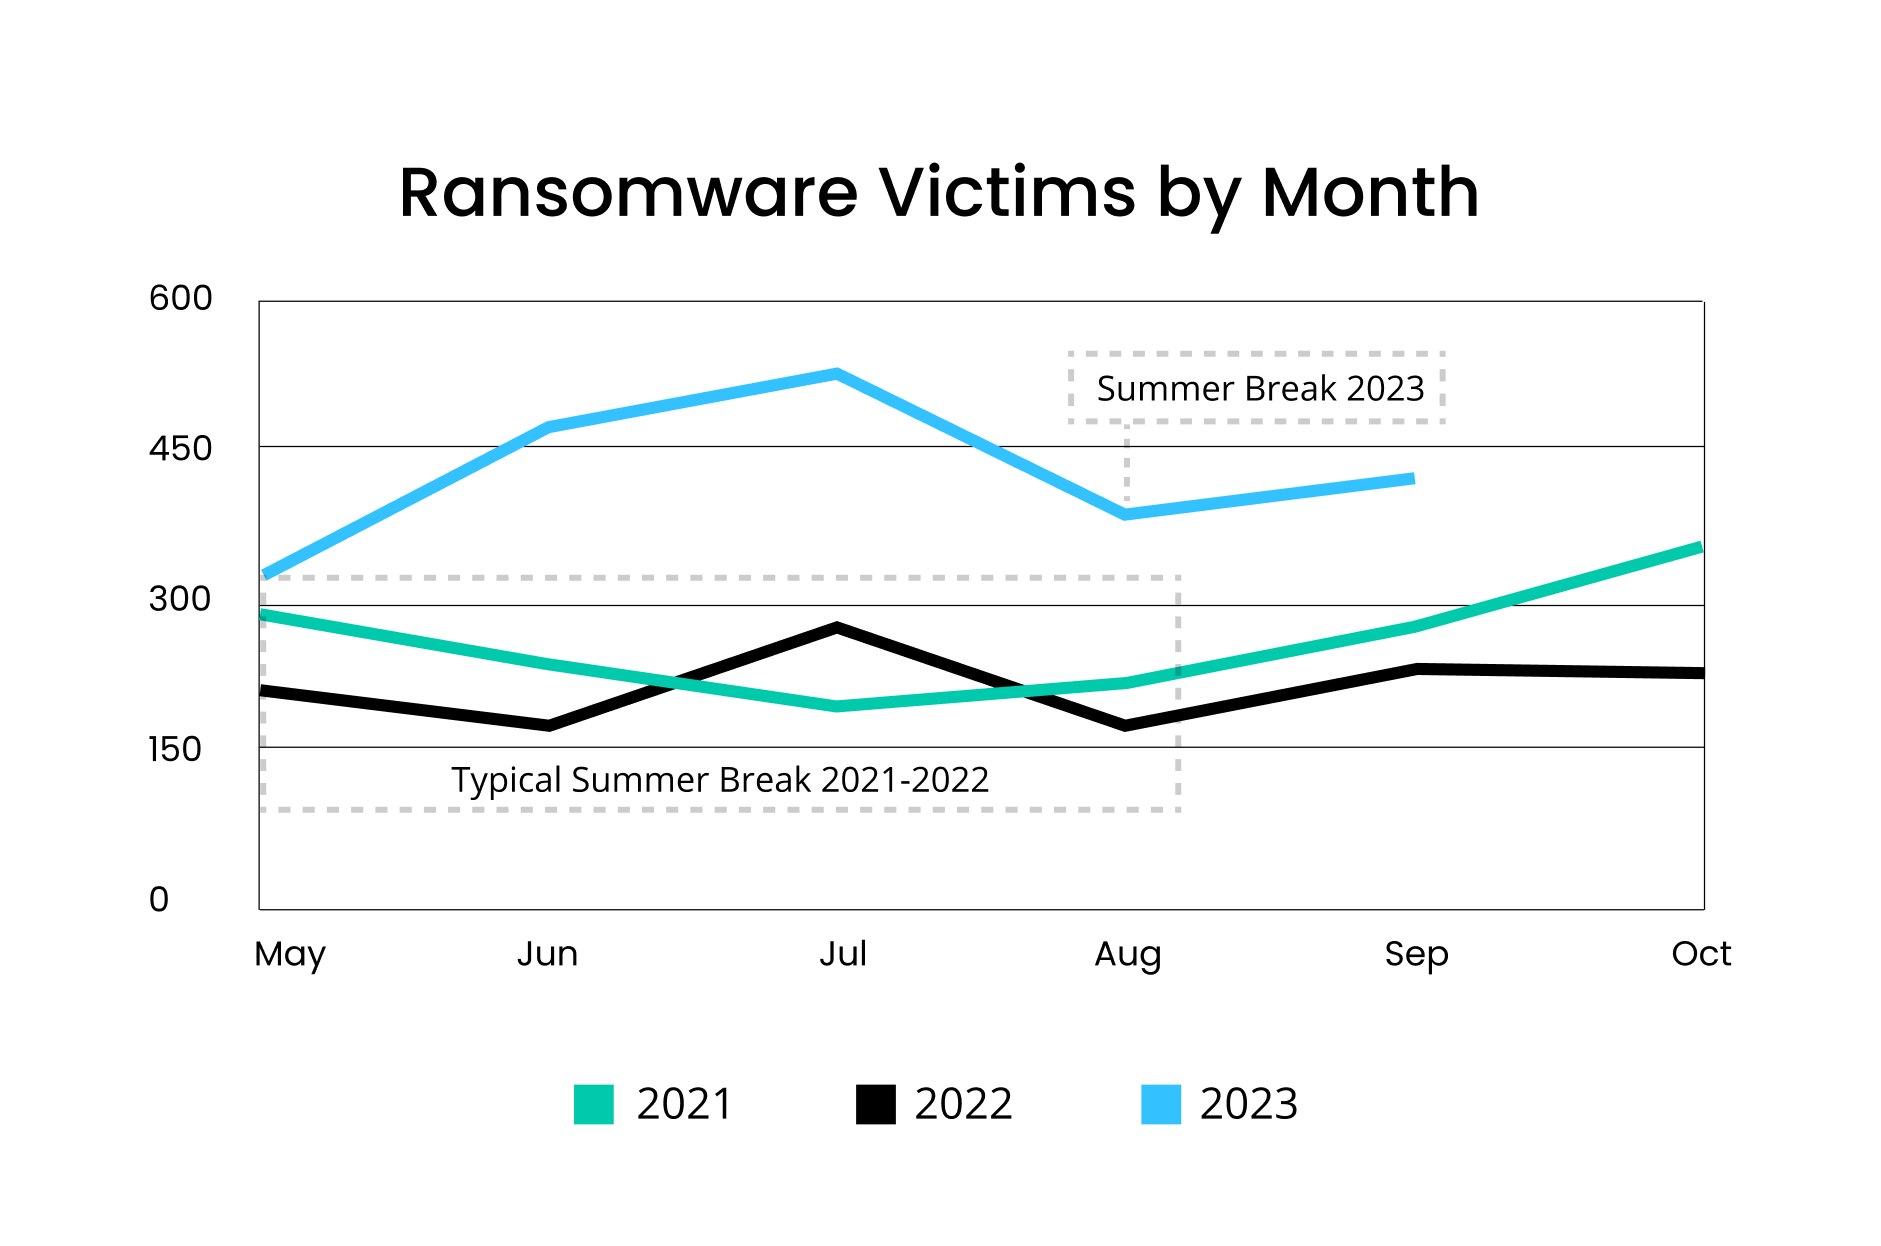 [LINE GRAPH] Average Ransomware Victims by Month from May 2021 - Oct. 2023